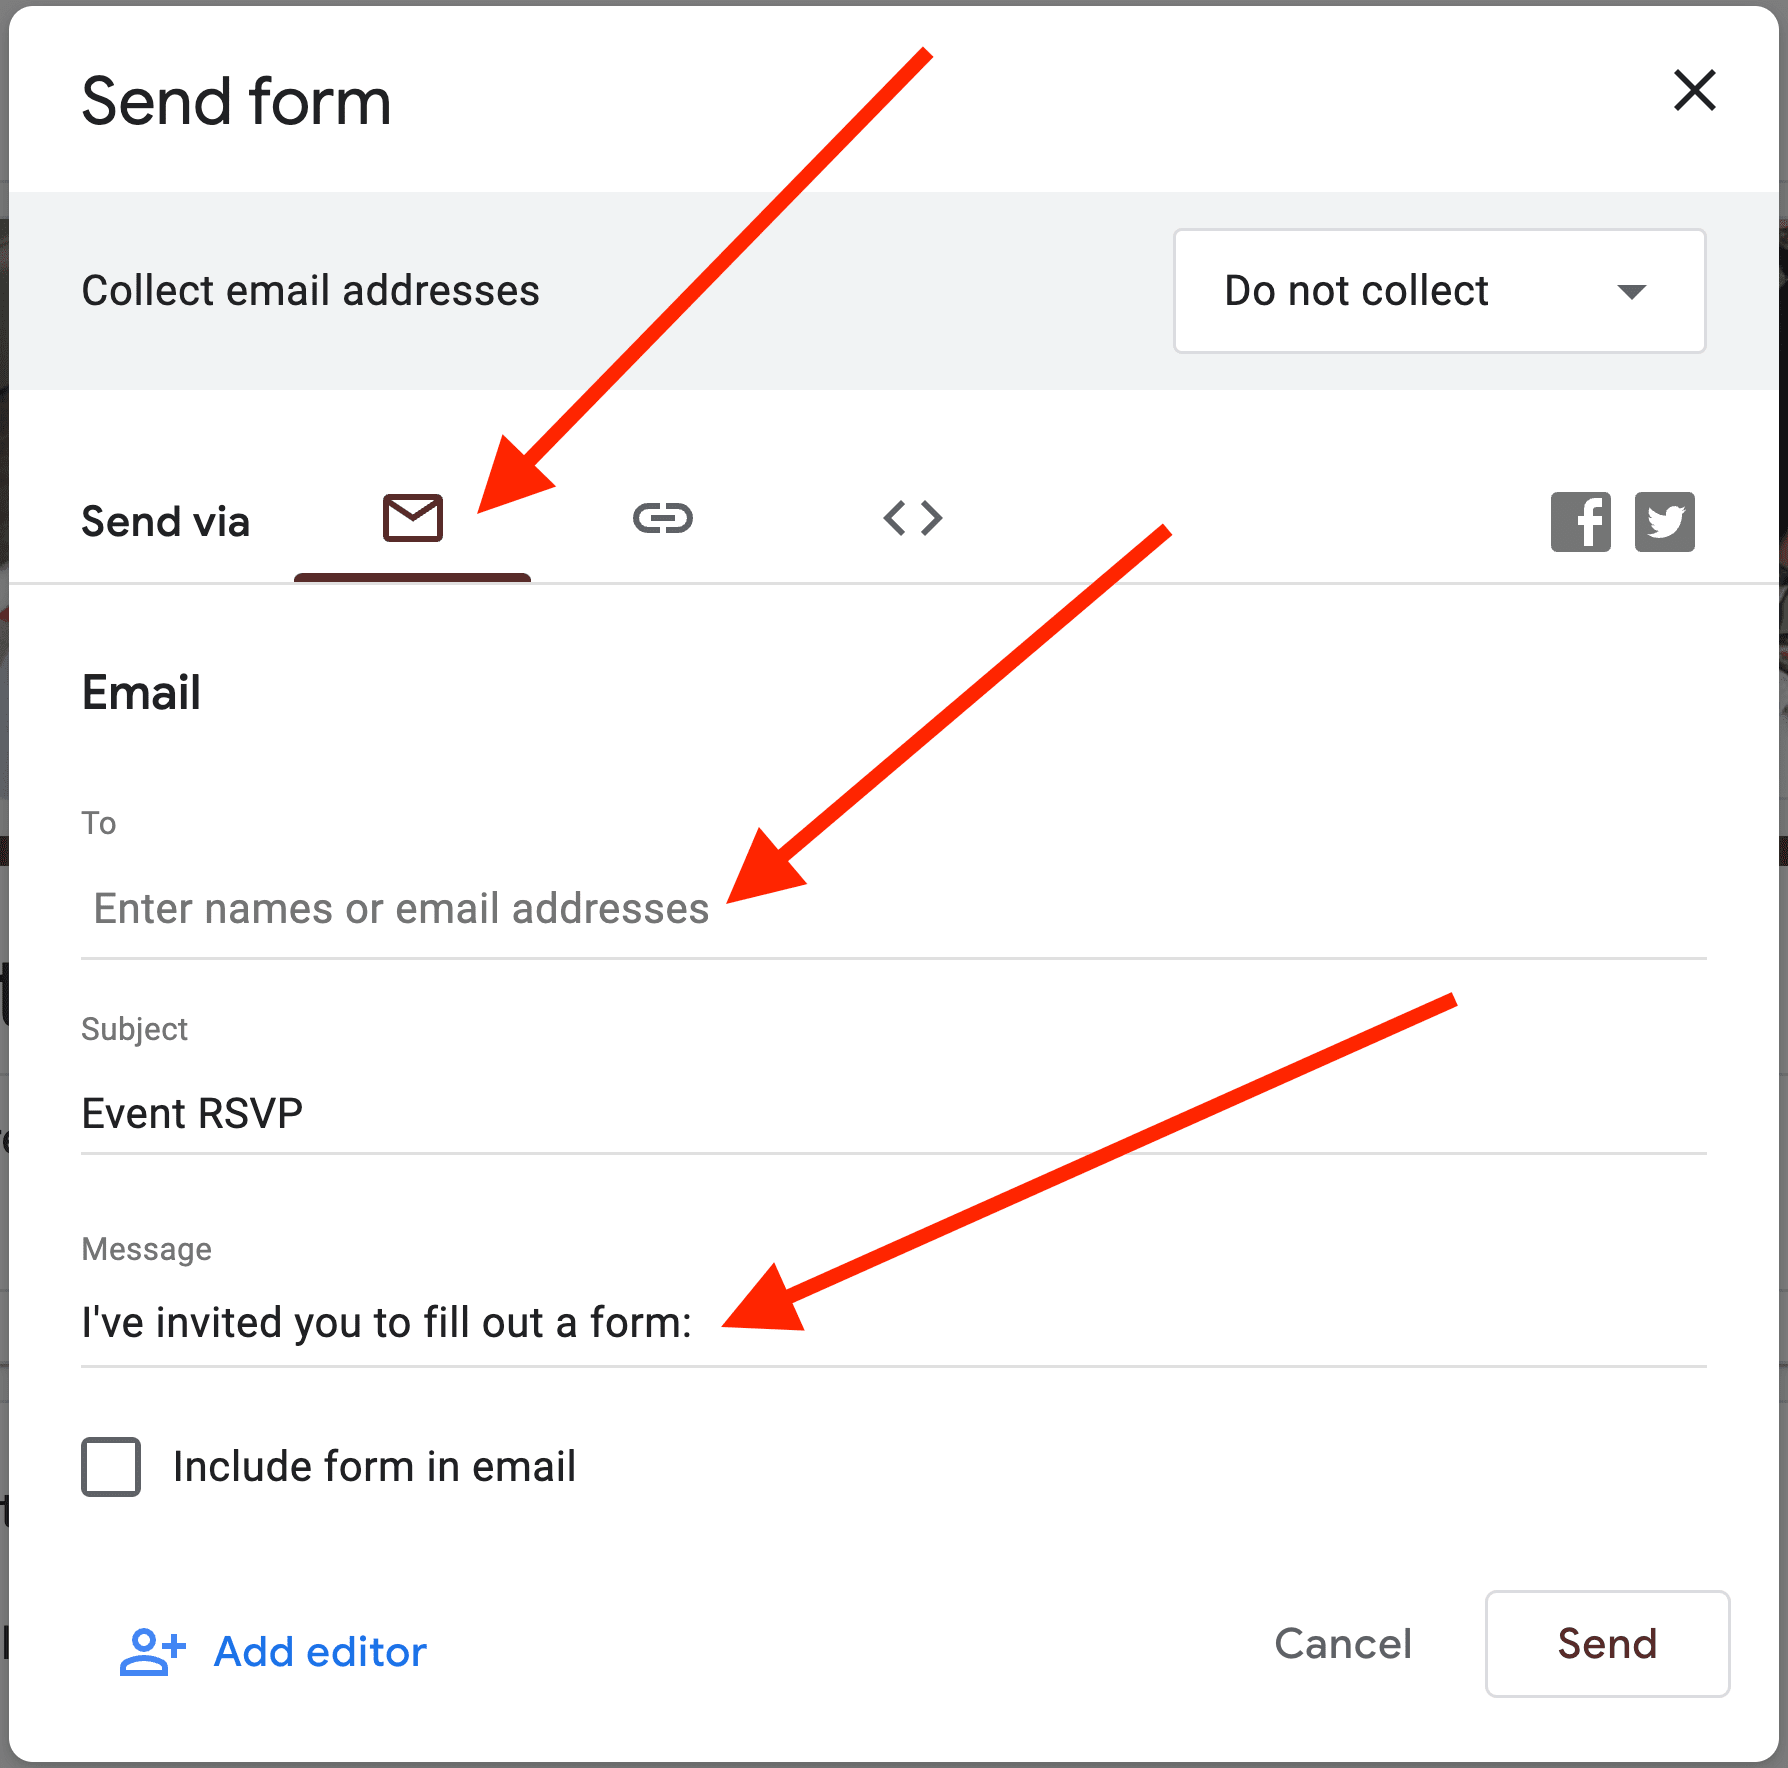 Three red arrowpointing towards email icon, email field, and email message box.